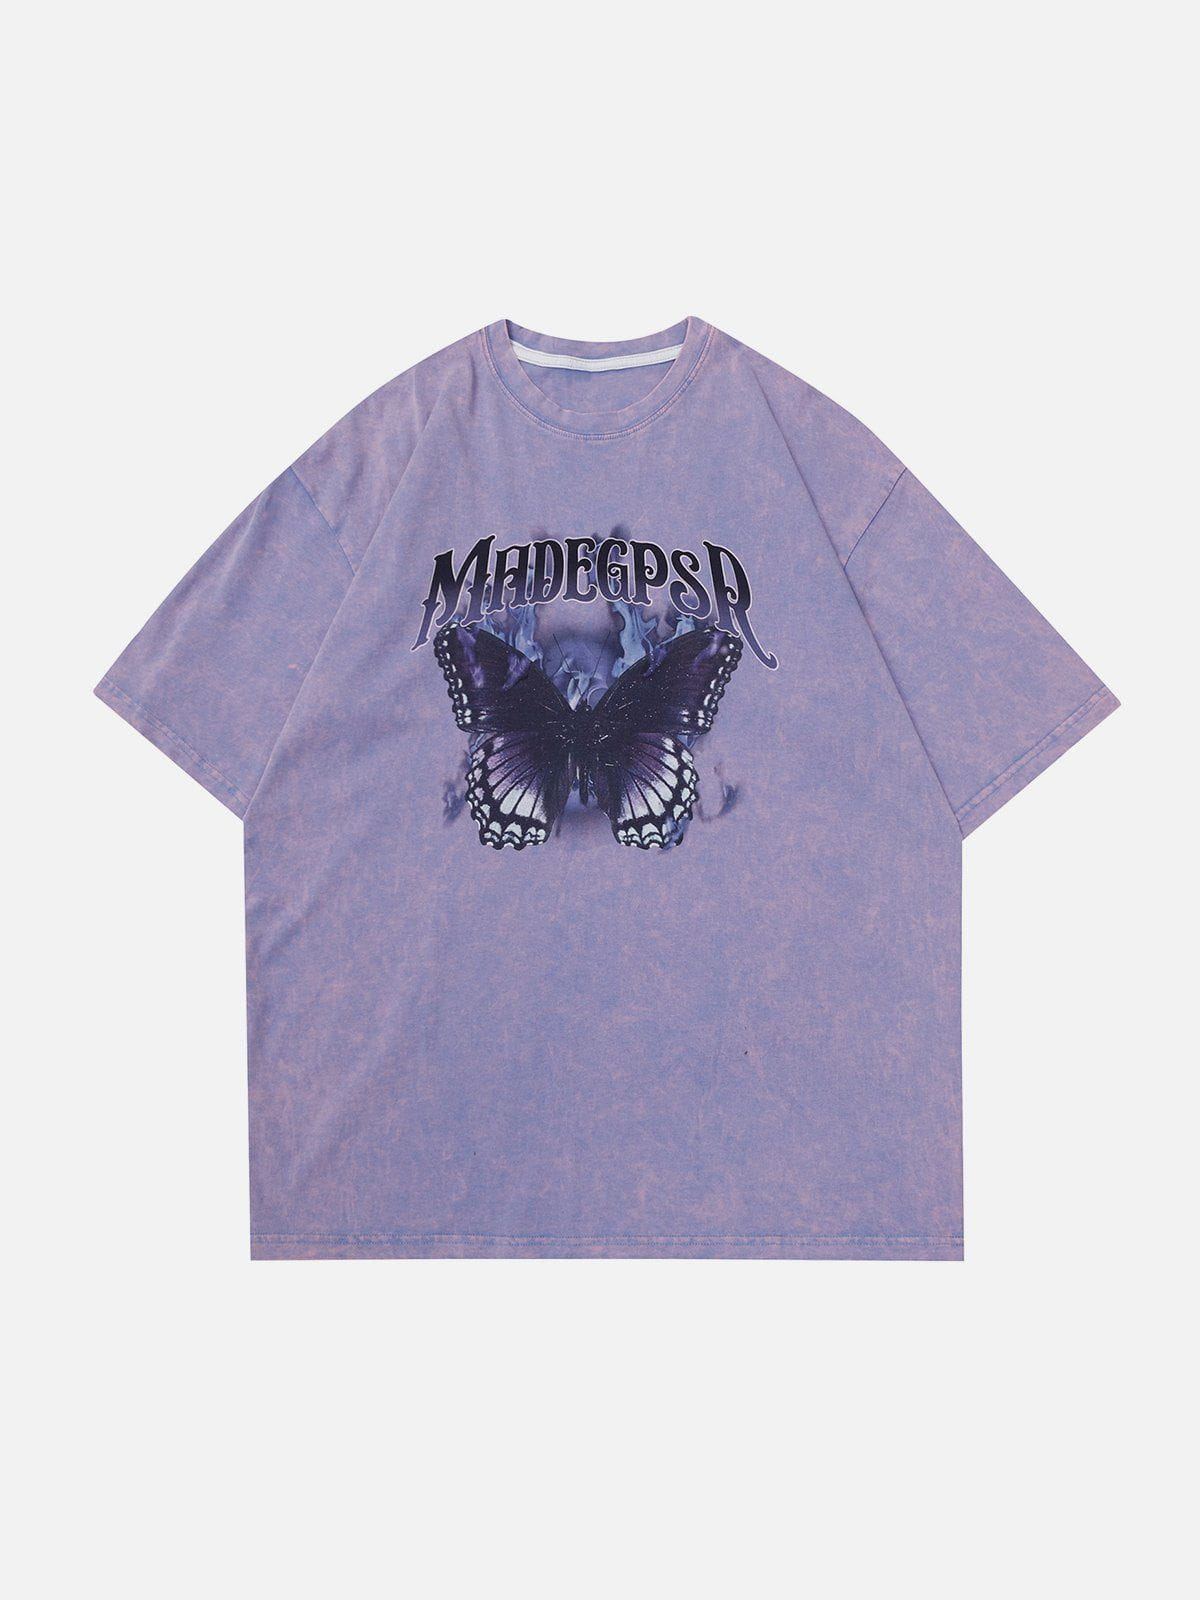 Sneakerland™ - Butterfly's Revenge Washed Tee